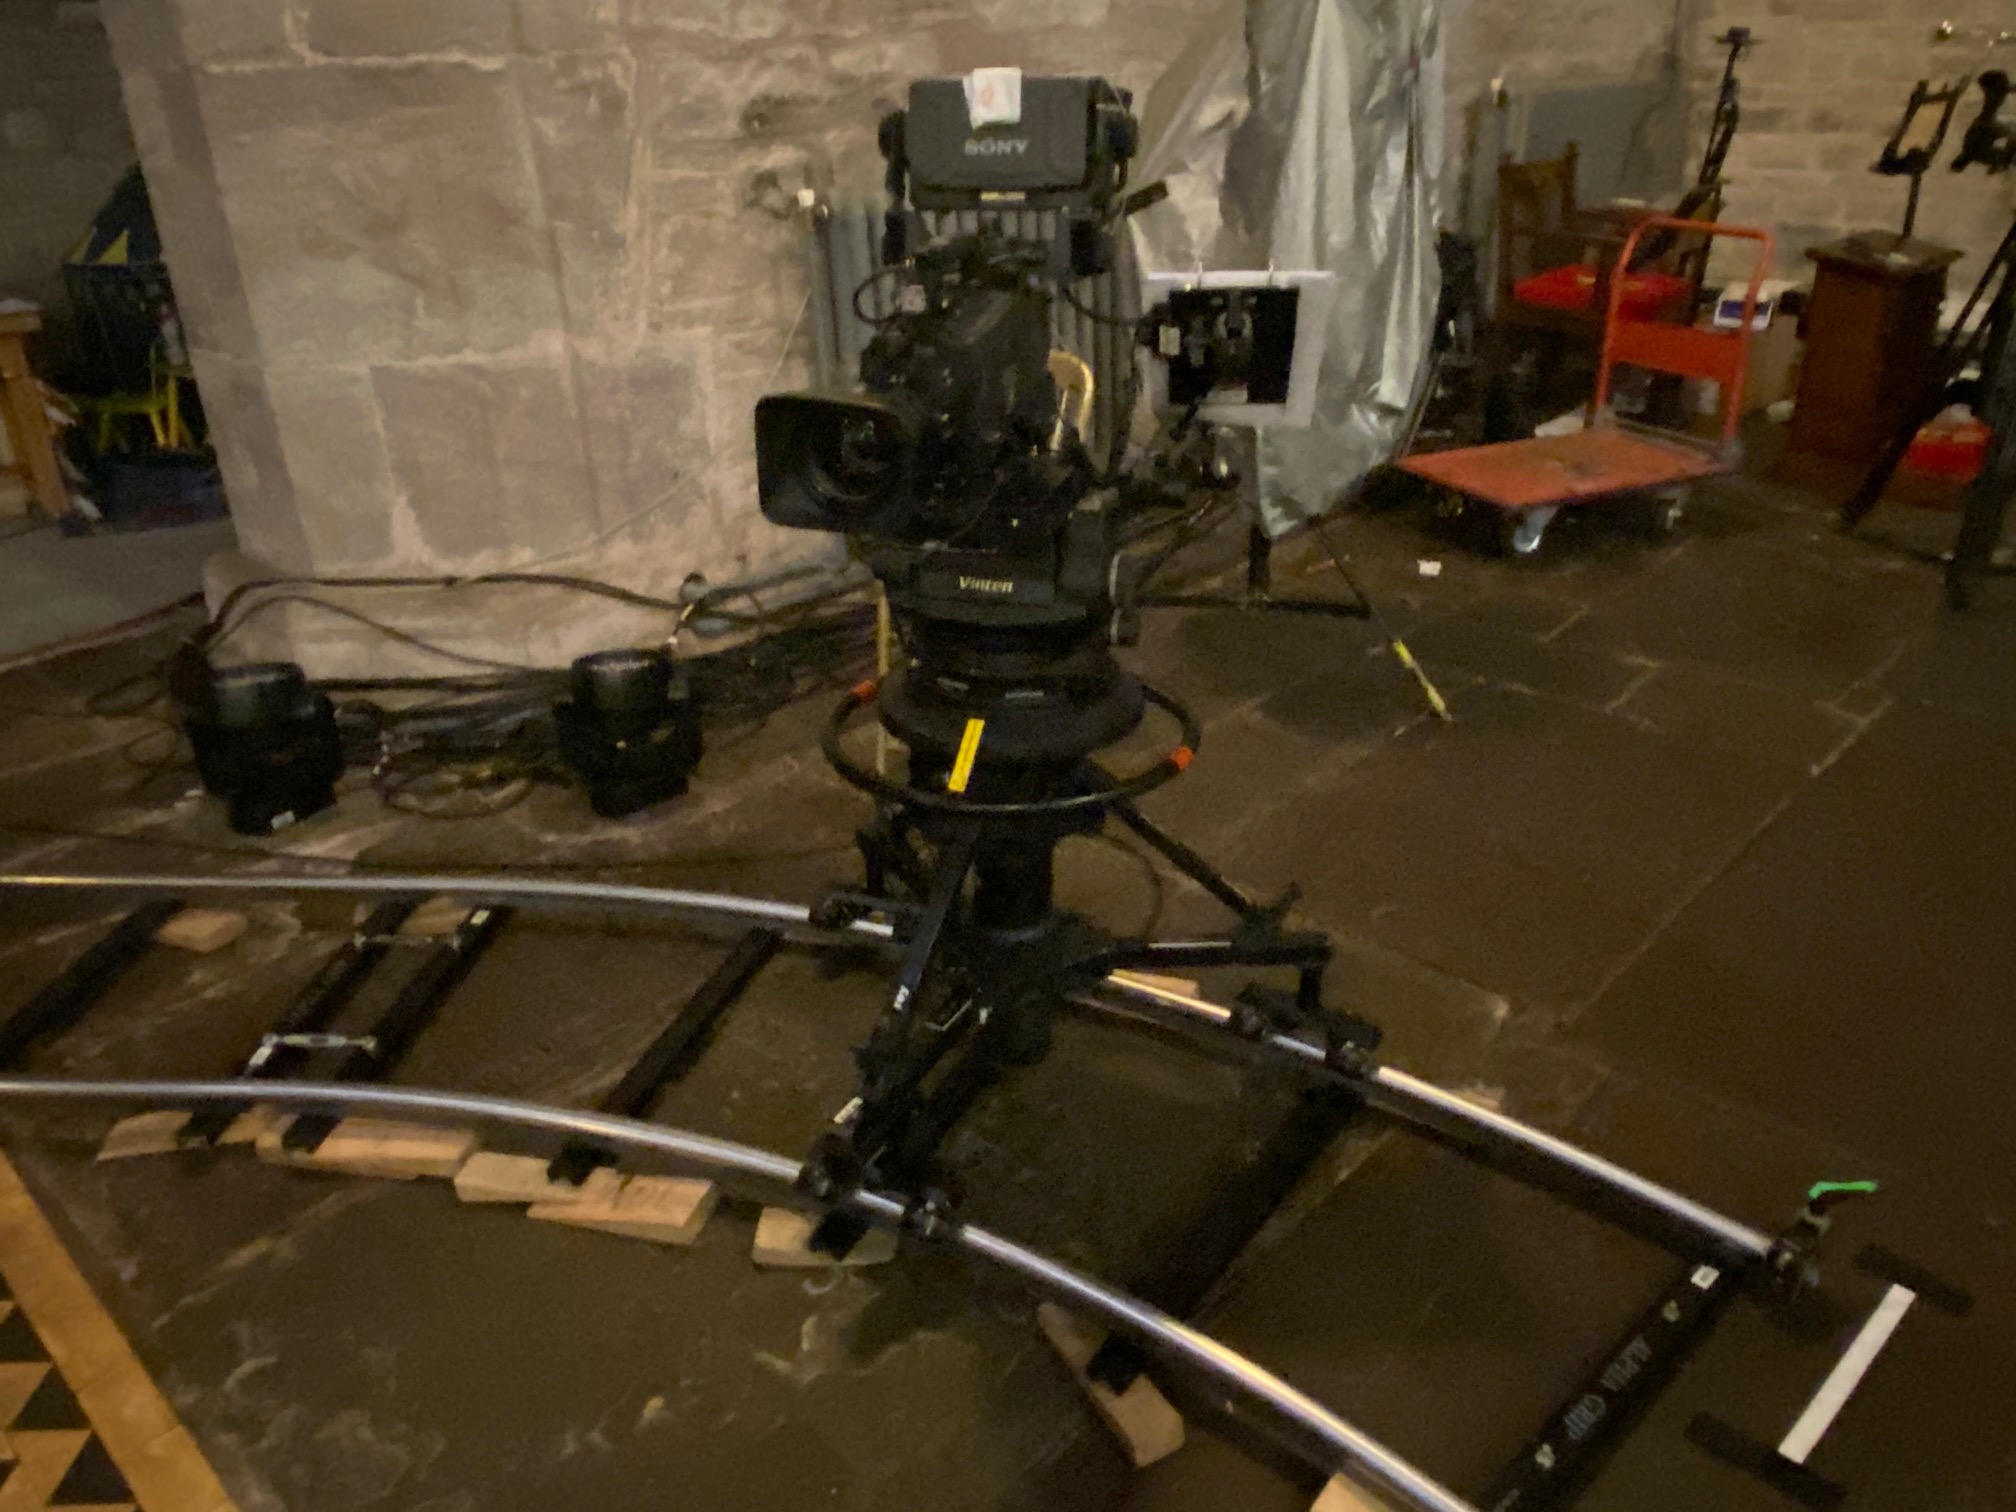 Huge amounts of tracking for the mobile filming were laid out in the cathedral